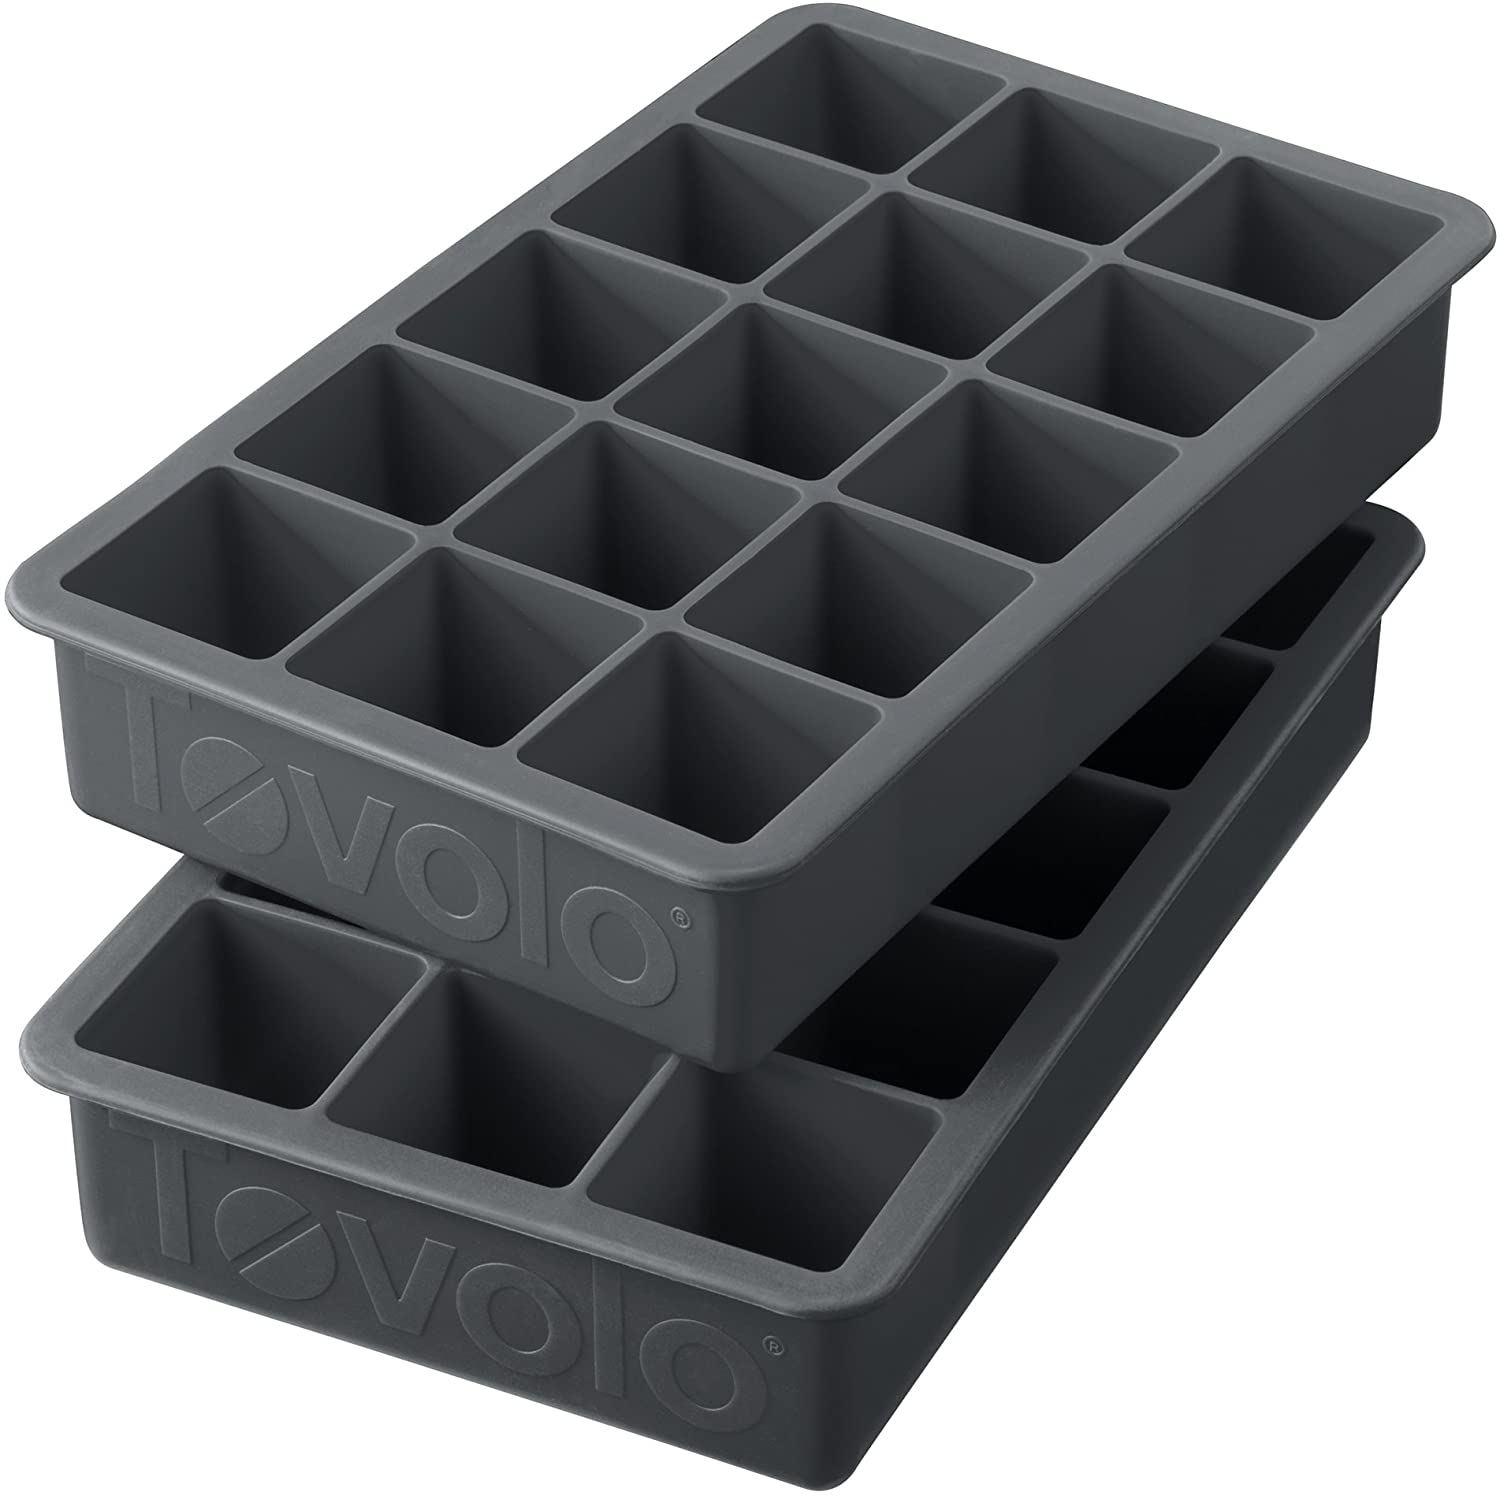 W&P Pebble Ice Tray, Makes 100+ Mini Ice Cubes, Dishwasher Safe, BPA Free,  Easy Release Silicone Tray with Protective Lid for Mojitos, Mint Juleps and